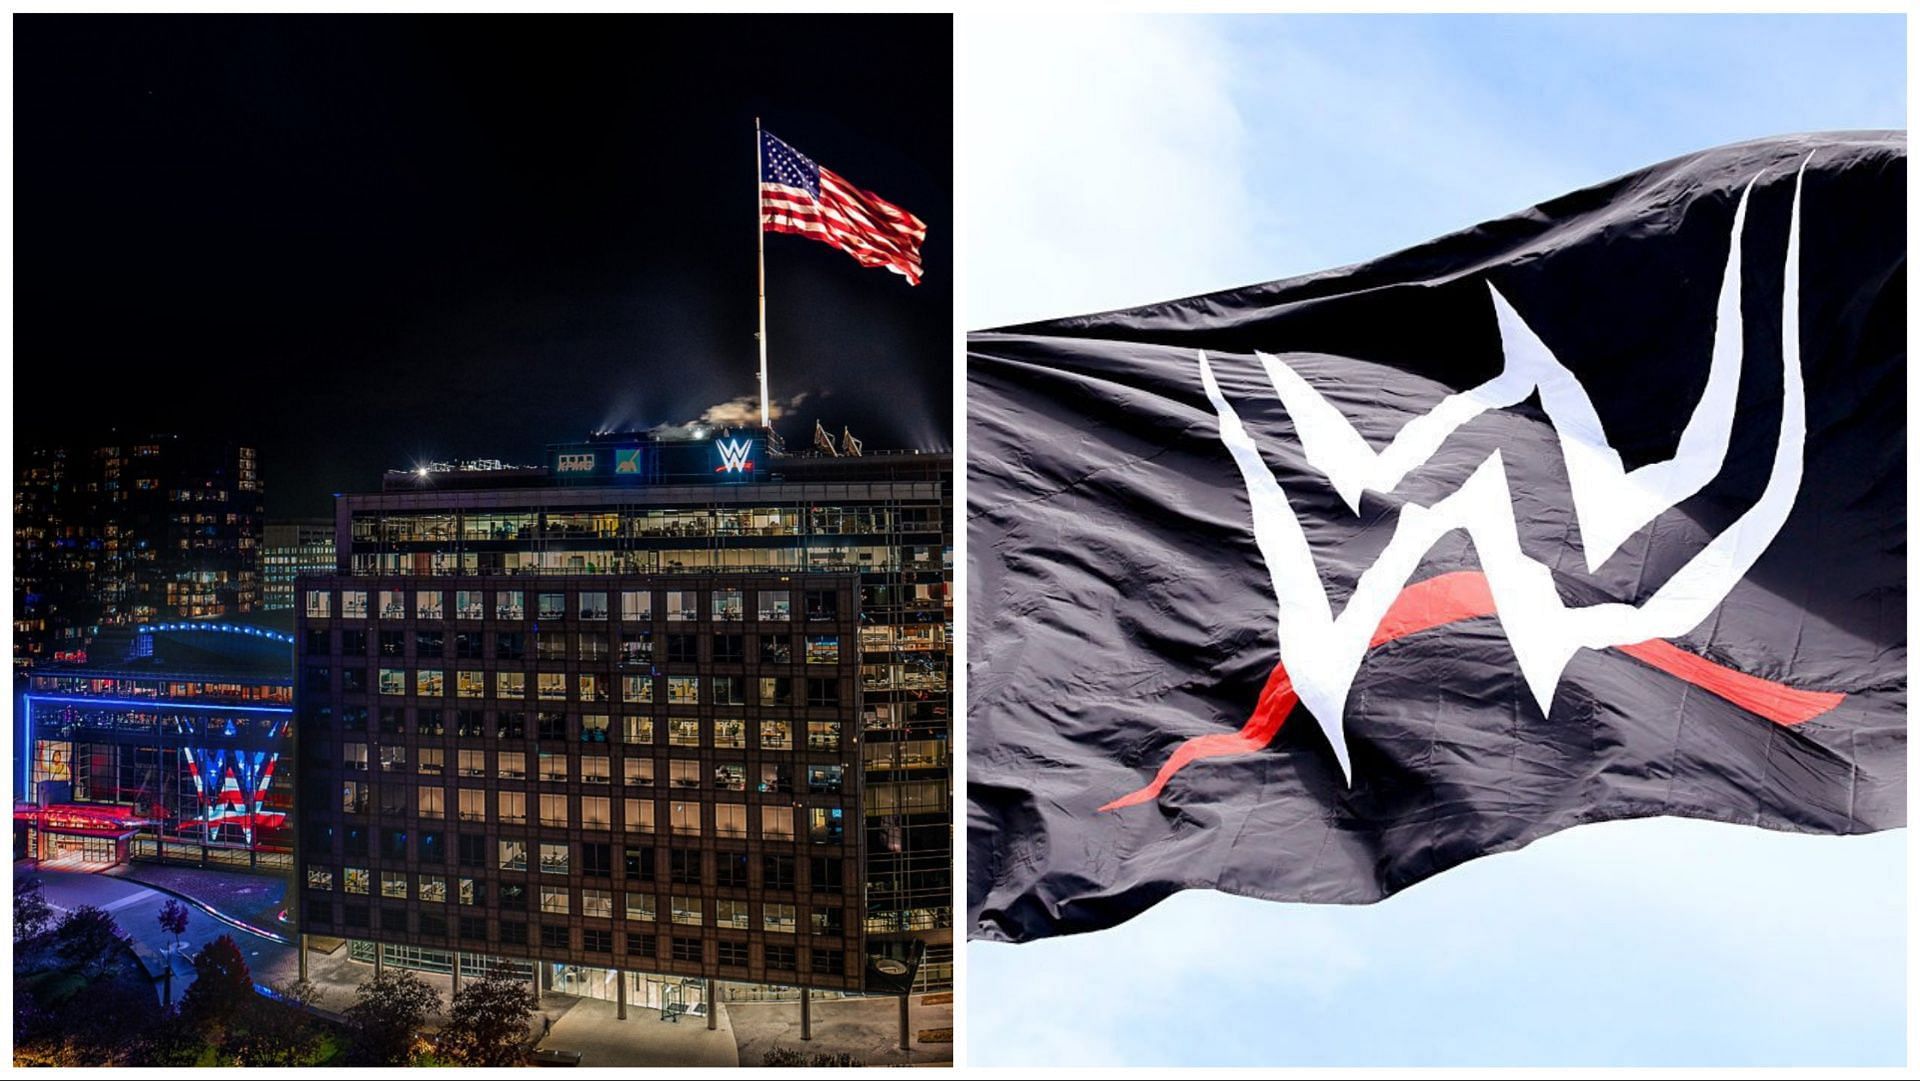 The new WWE HQ in Stamford, the official WWE logo flag